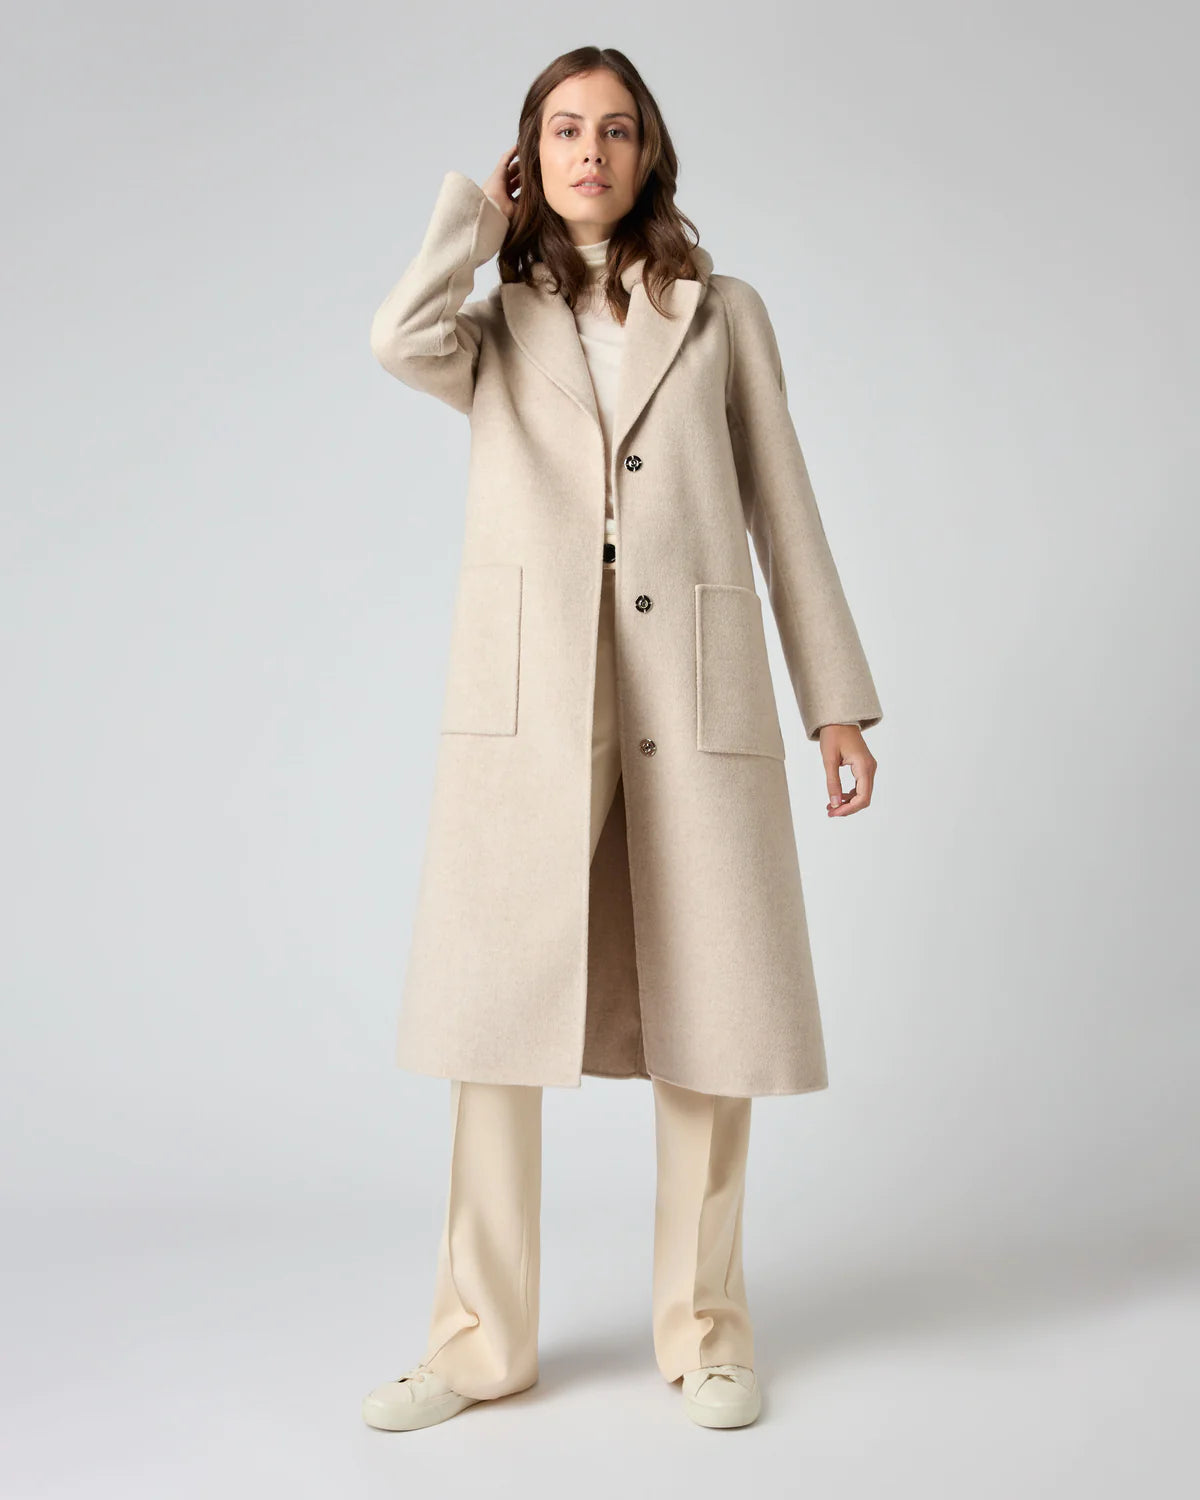 lady wearing light tone clothing with long trench coat and cashmere jumper